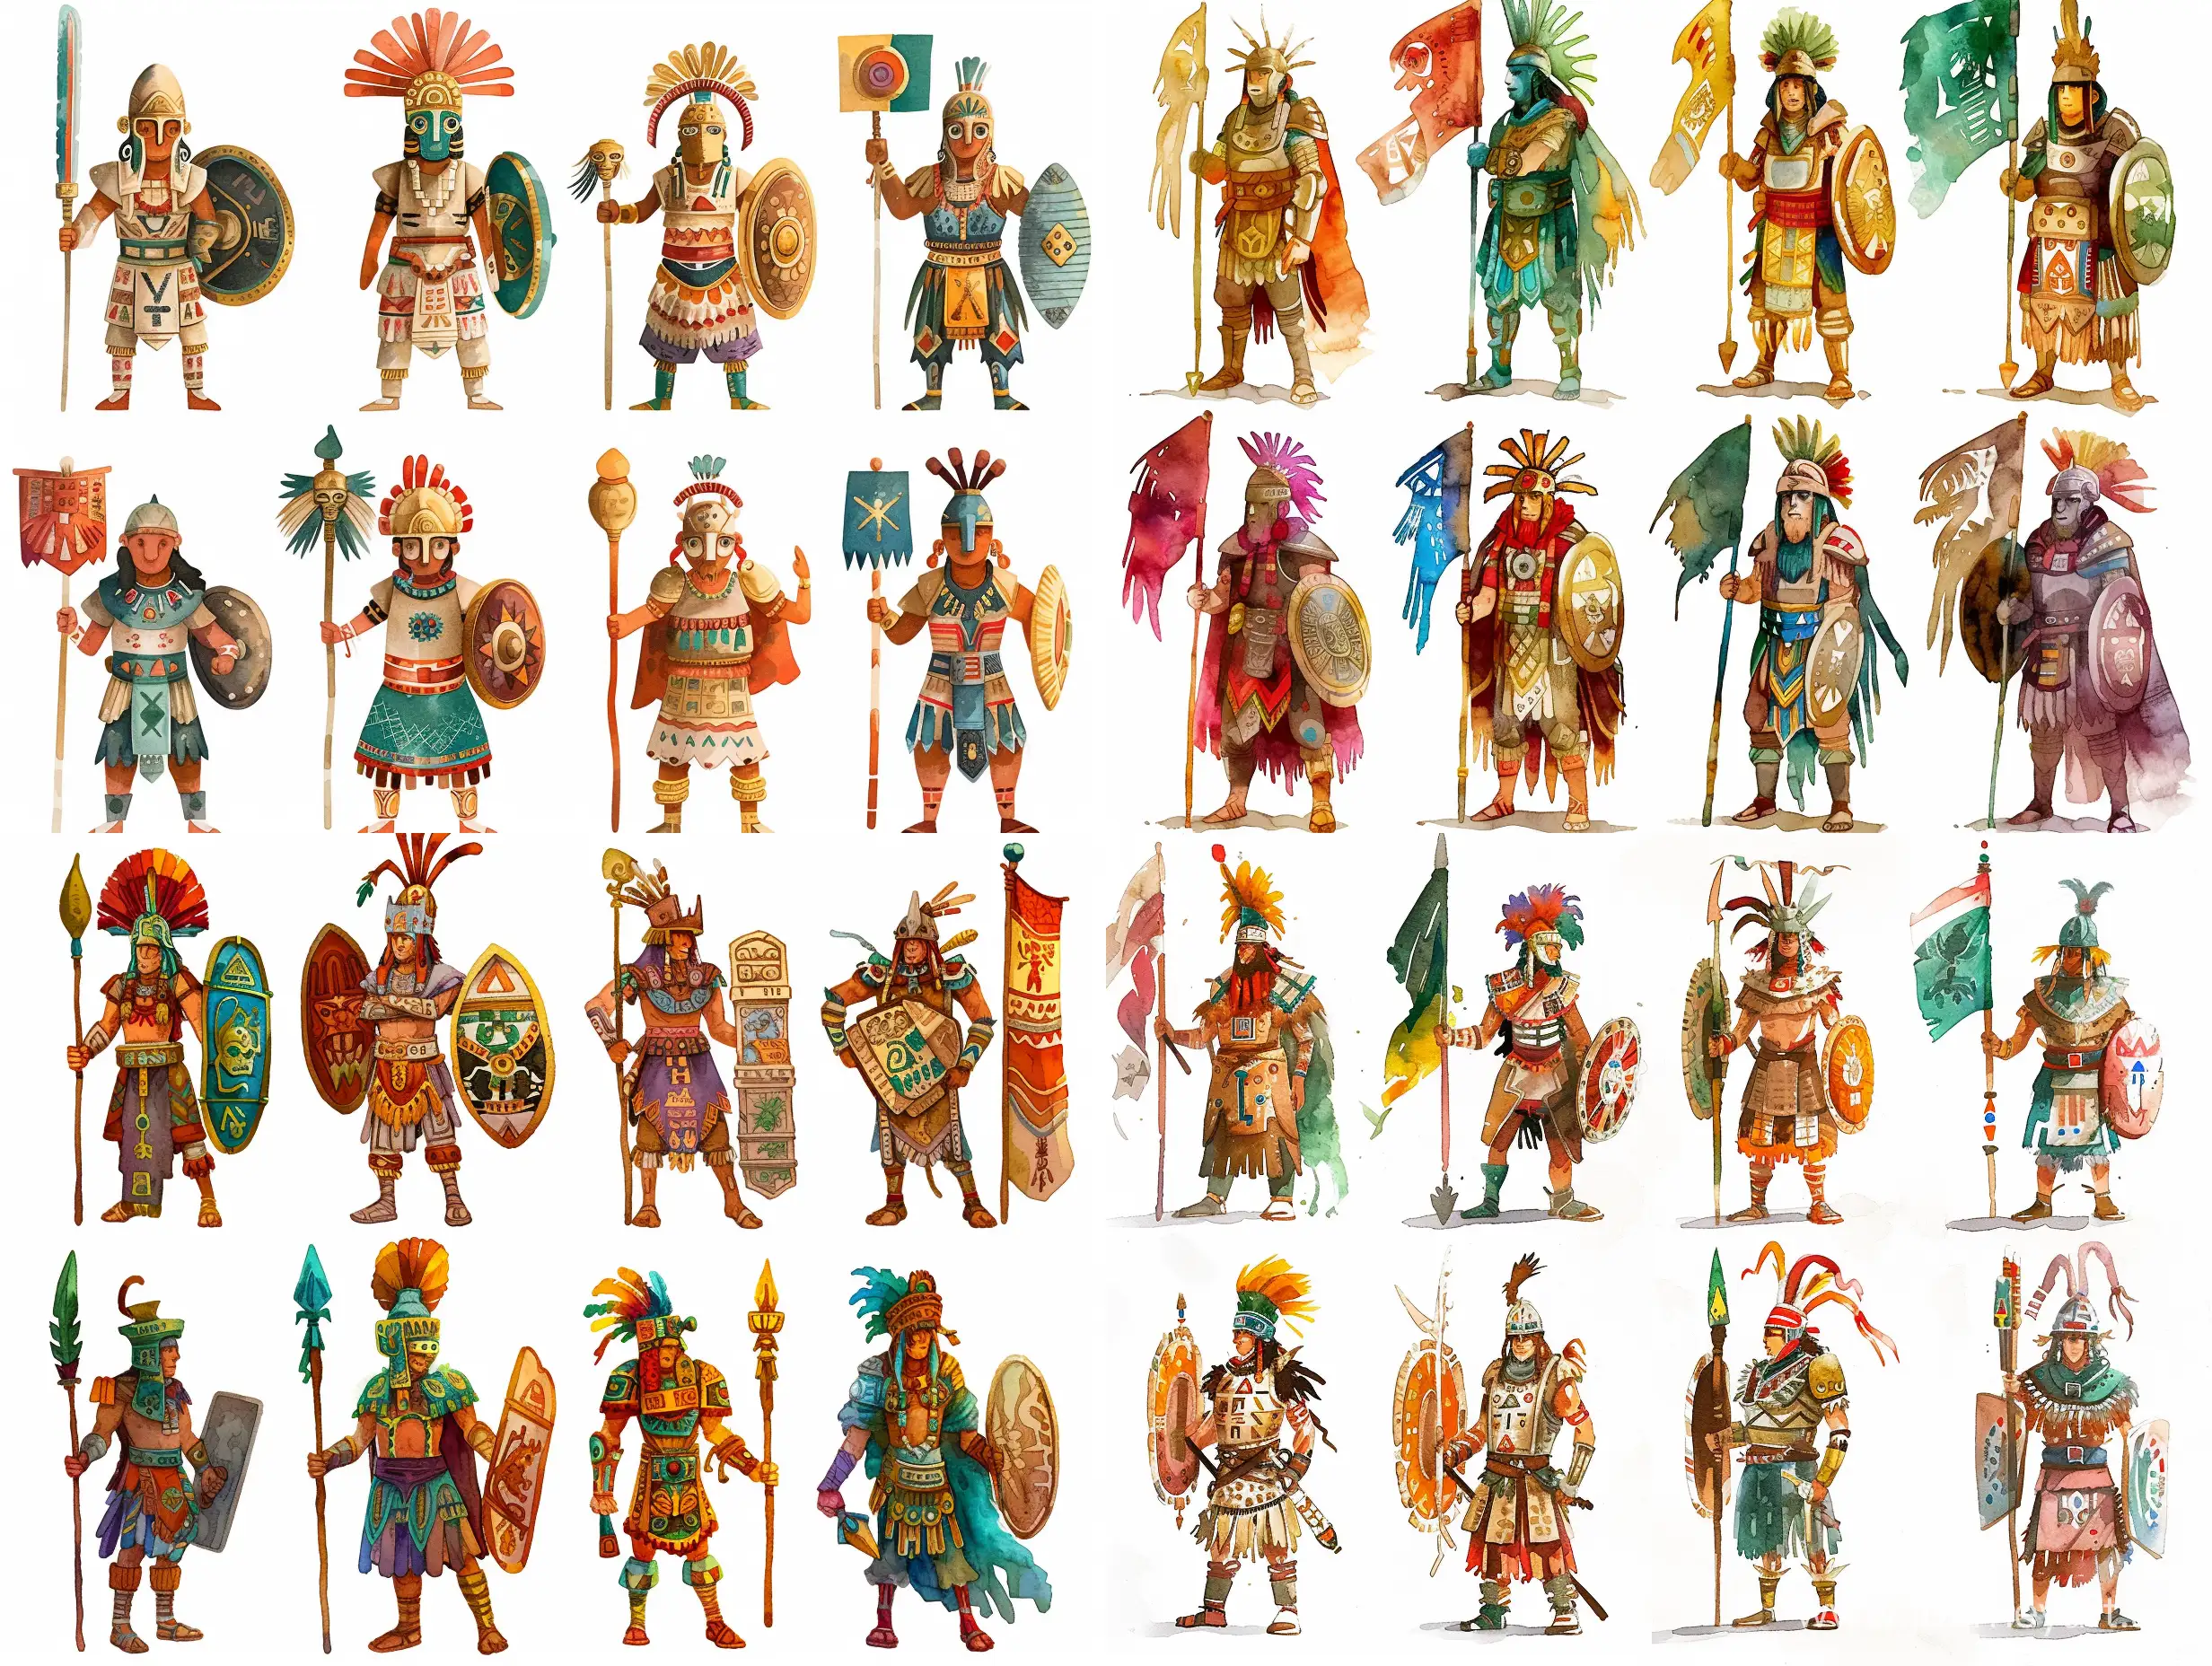 Stylized-Aztec-Warrior-Variants-with-Flag-in-Decorative-Watercolor-and-Ink